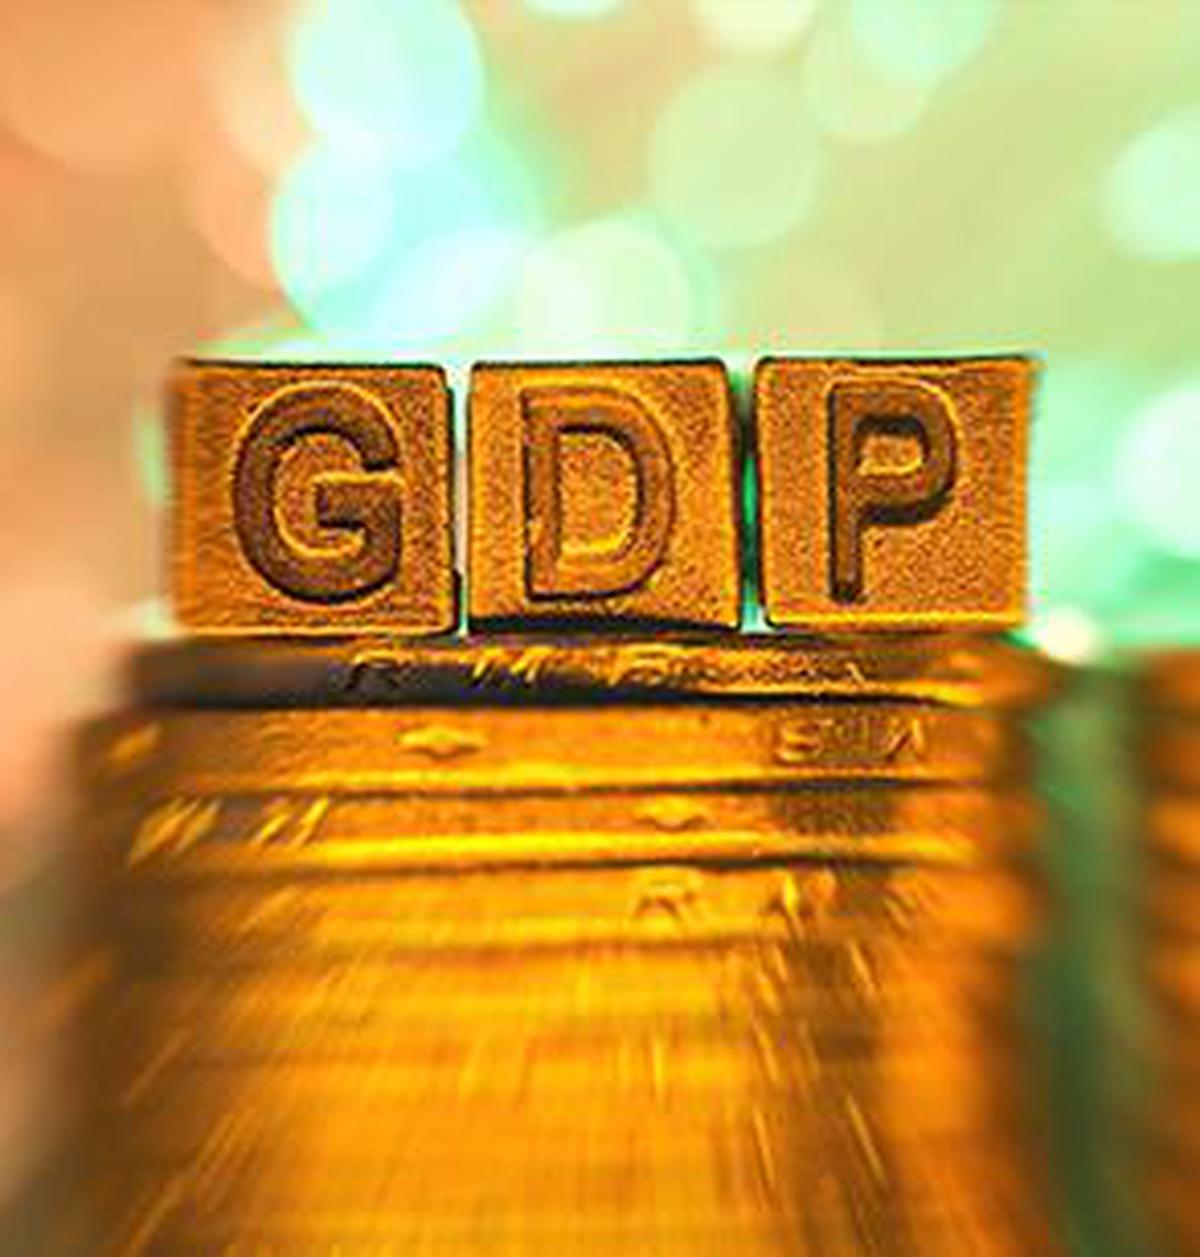 GDP copper alphabet on coin stack in radial blur illuminated with light